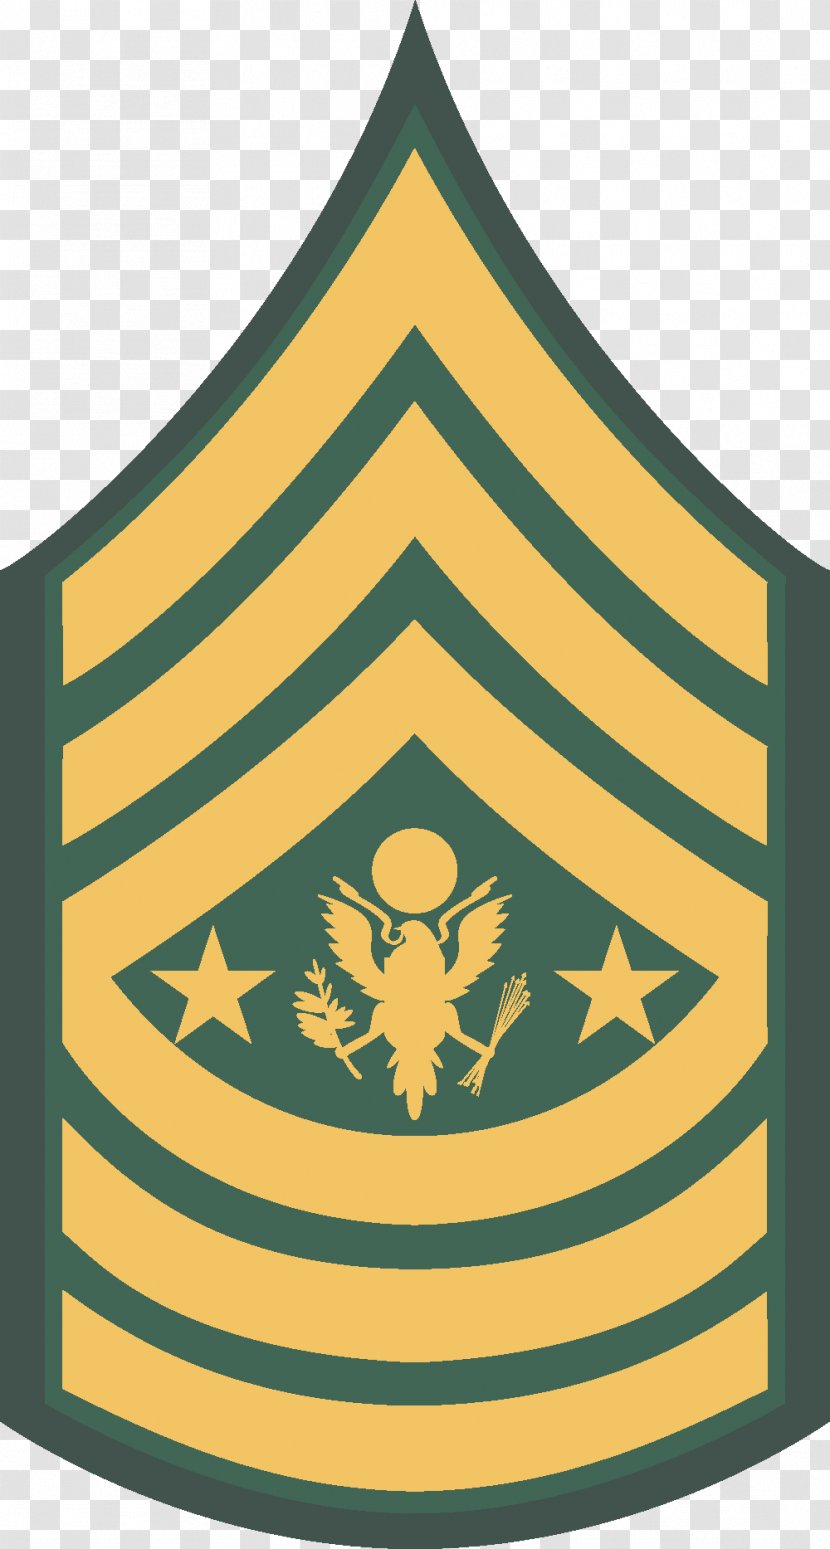 Sergeant Major Of The Army United States Enlisted Rank - Insignias Transparent PNG